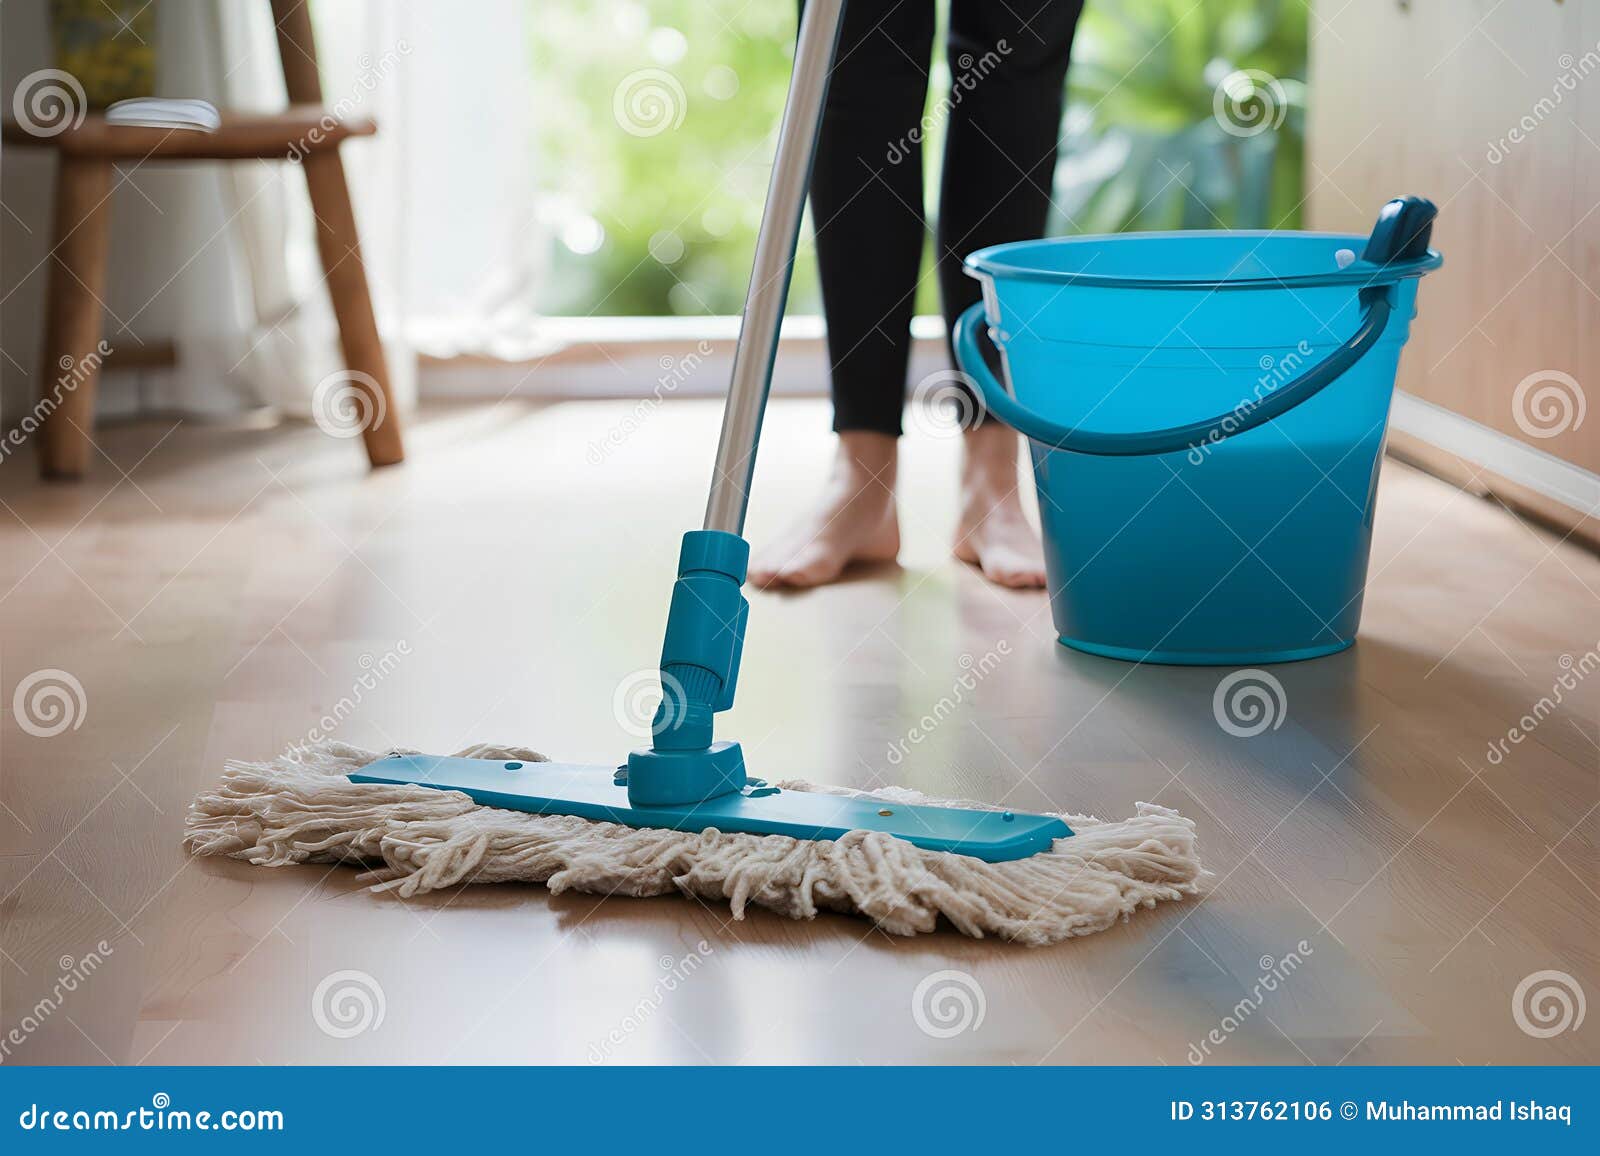 simple mop on laminate floor with water bucket in background